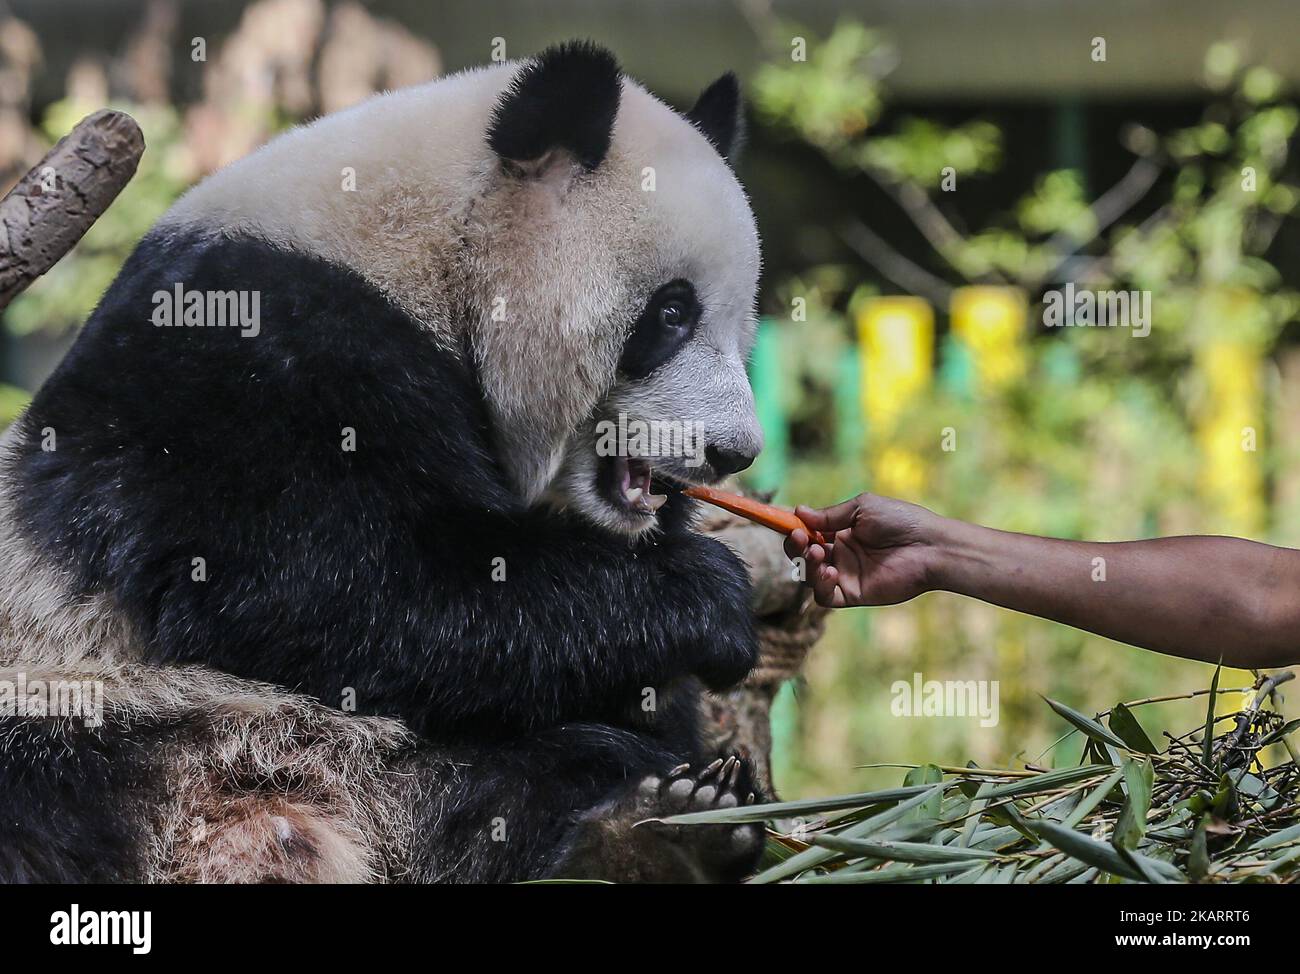 Two-year-old female giant panda cub Nuan Nuan reacts inside her enclosure at the Giant Panda Conservation Center in Kuala Lumpur, Malaysia on October 5, 2017. Nuan Nuan, the offspring of panda pair Xing Xing and Liang Liang at Giant Panda Conservation Center, will soon be sent to China.The cub will be returned to China as Malaysia was only given the right to keep the panda, for two years after birth. (Photo by Mohd Daud/NurPhoto) Stock Photo